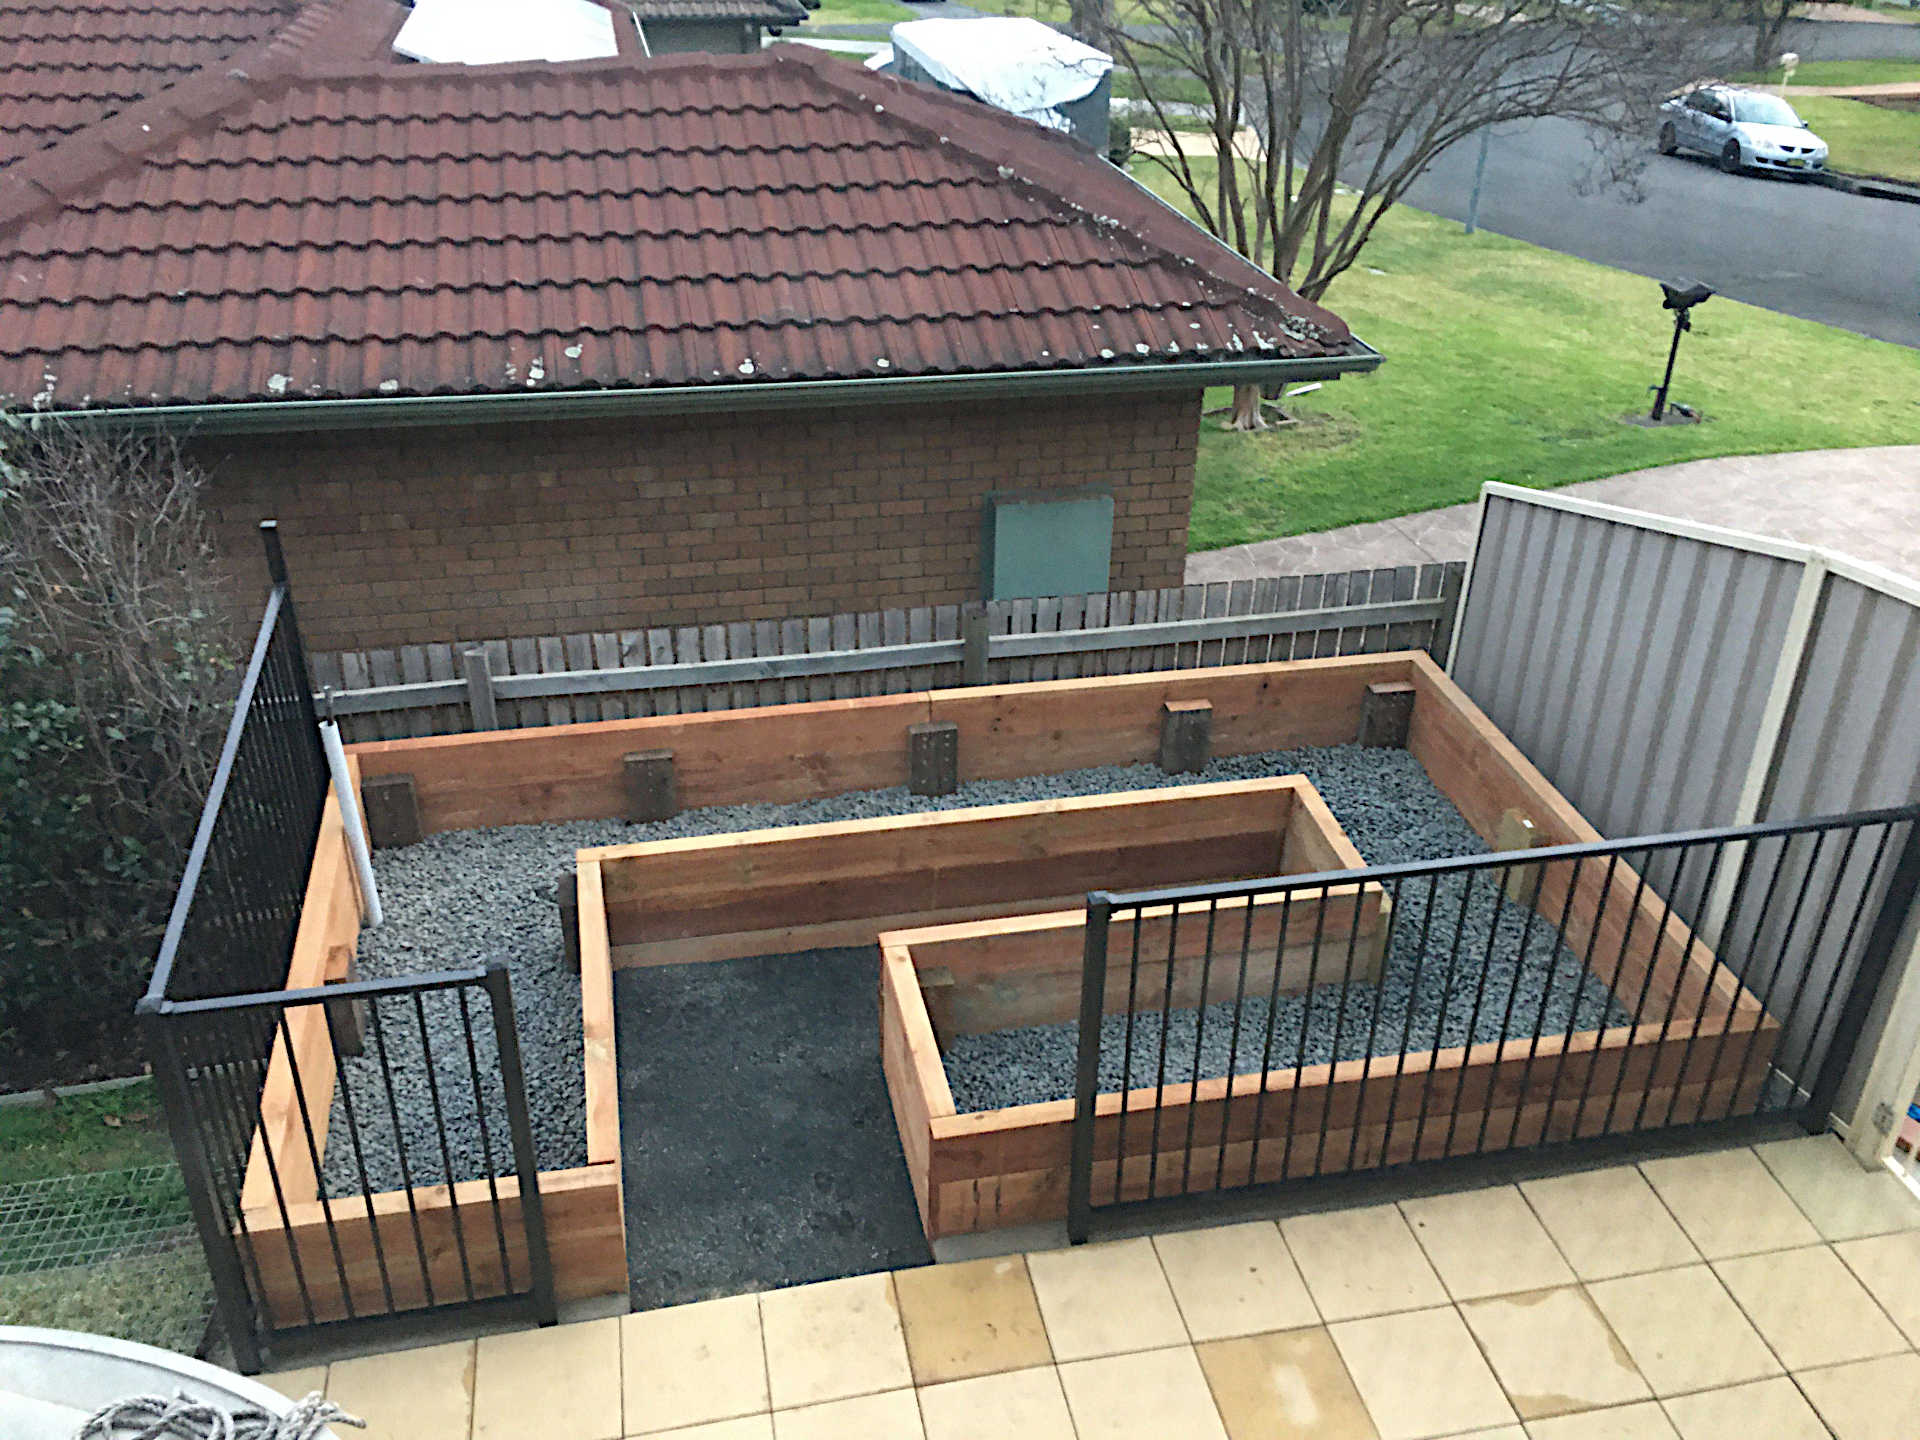 Treated Pine Raised Vegetable Garden Bed with aggregate for drainage and compacted metal dust foundation for paving Figtree Wollongong NSW